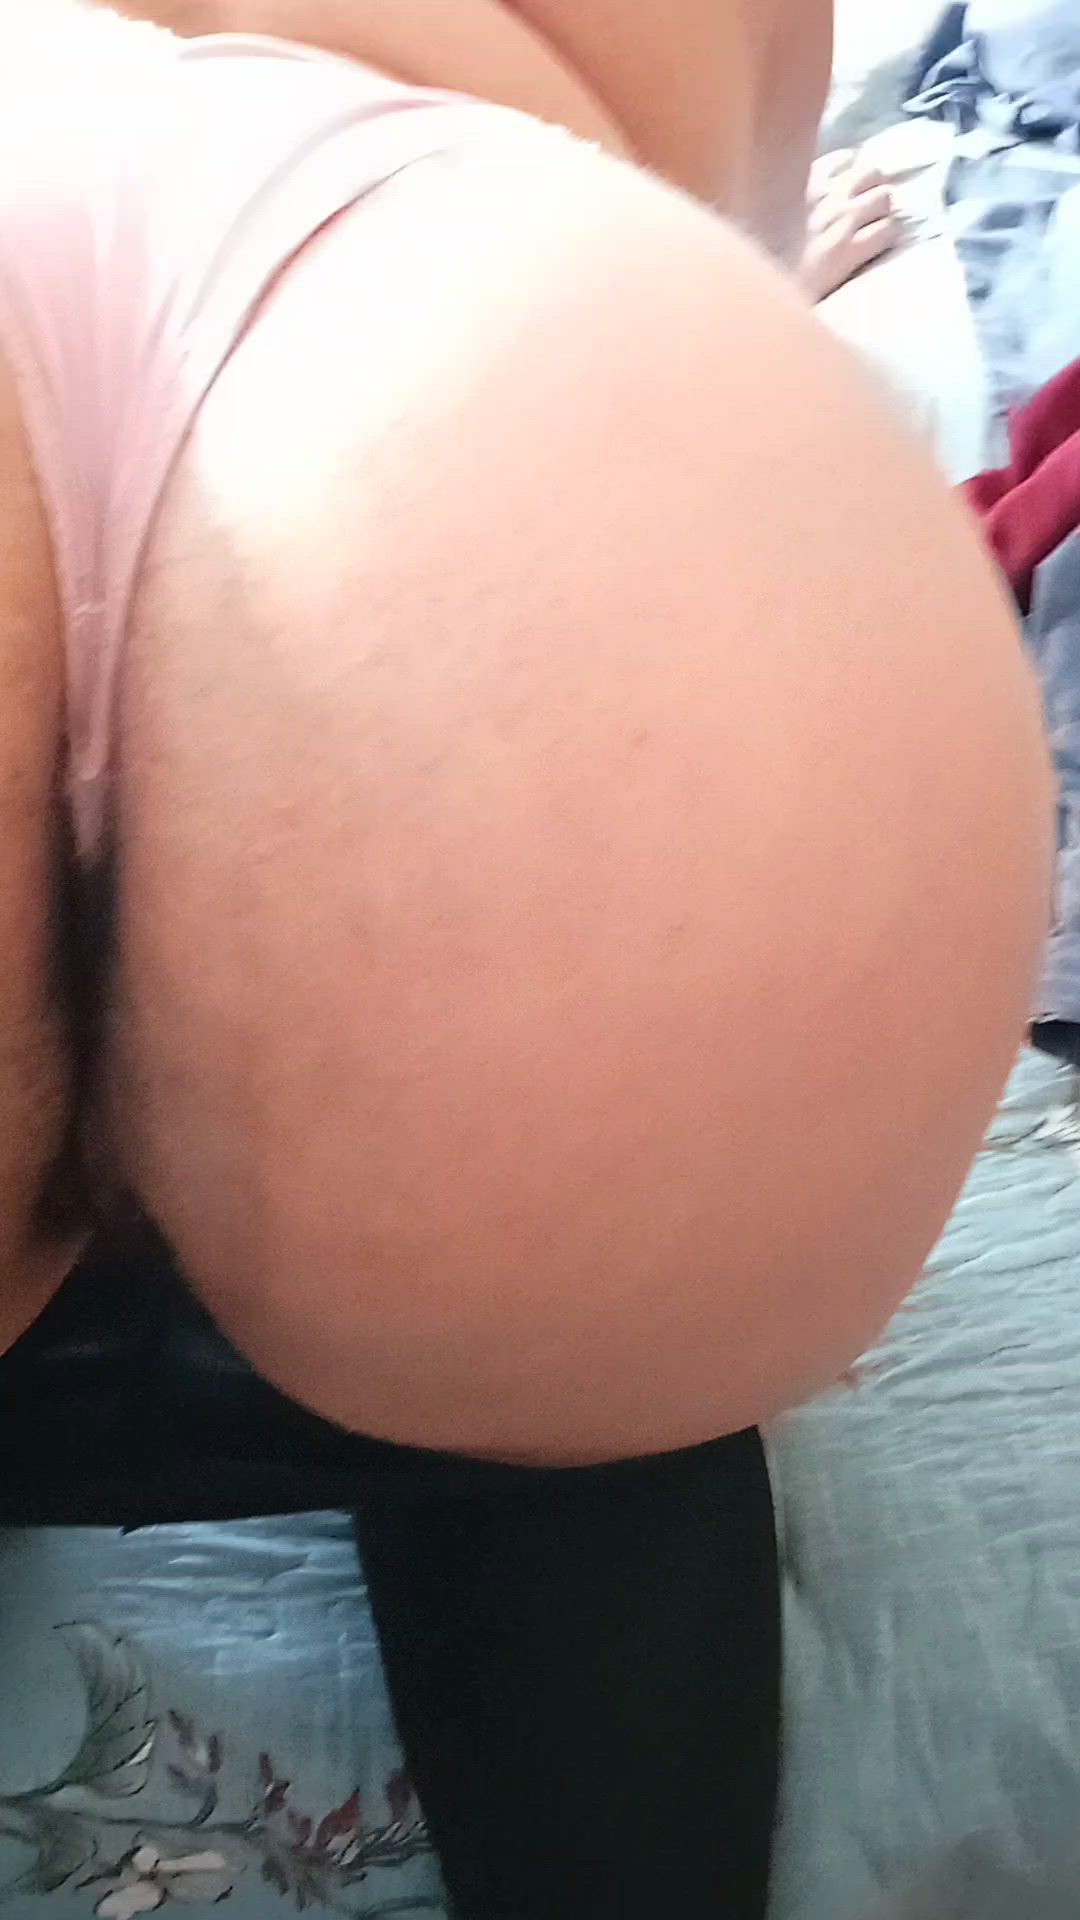 Ass porn video with onlyfans model chubbycita69 <strong>@chubbycita69</strong>